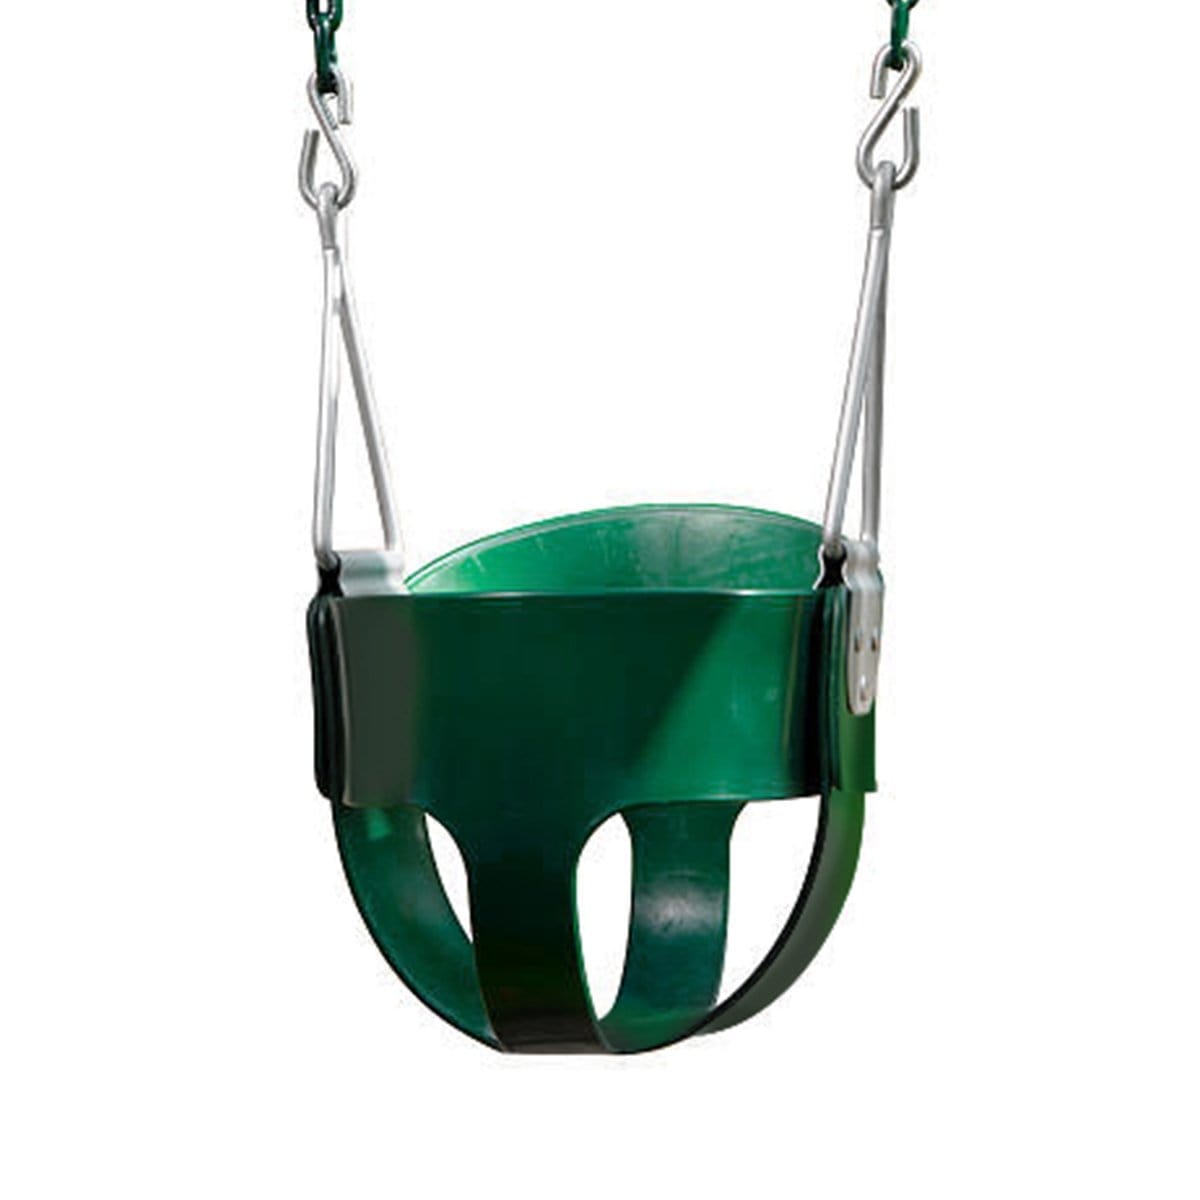 Close up image of Bucket Swing Seat in white background